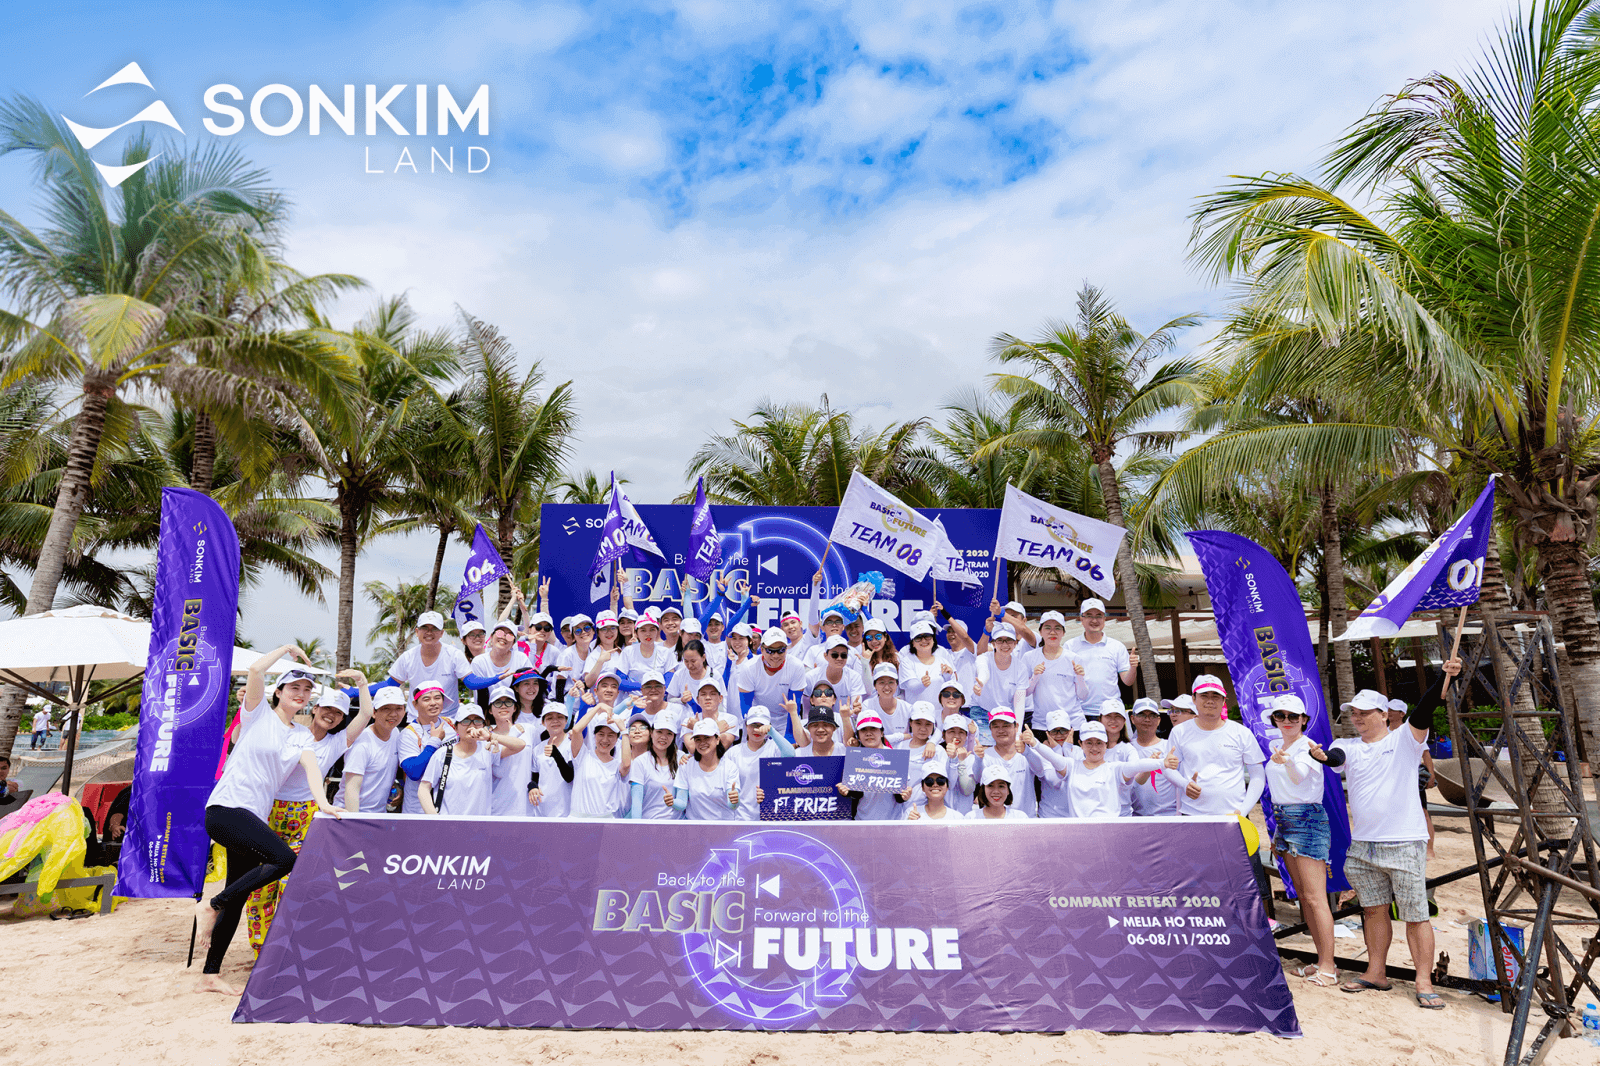 SonKim Land team building 2020 – Back to the basic - Forward to the future